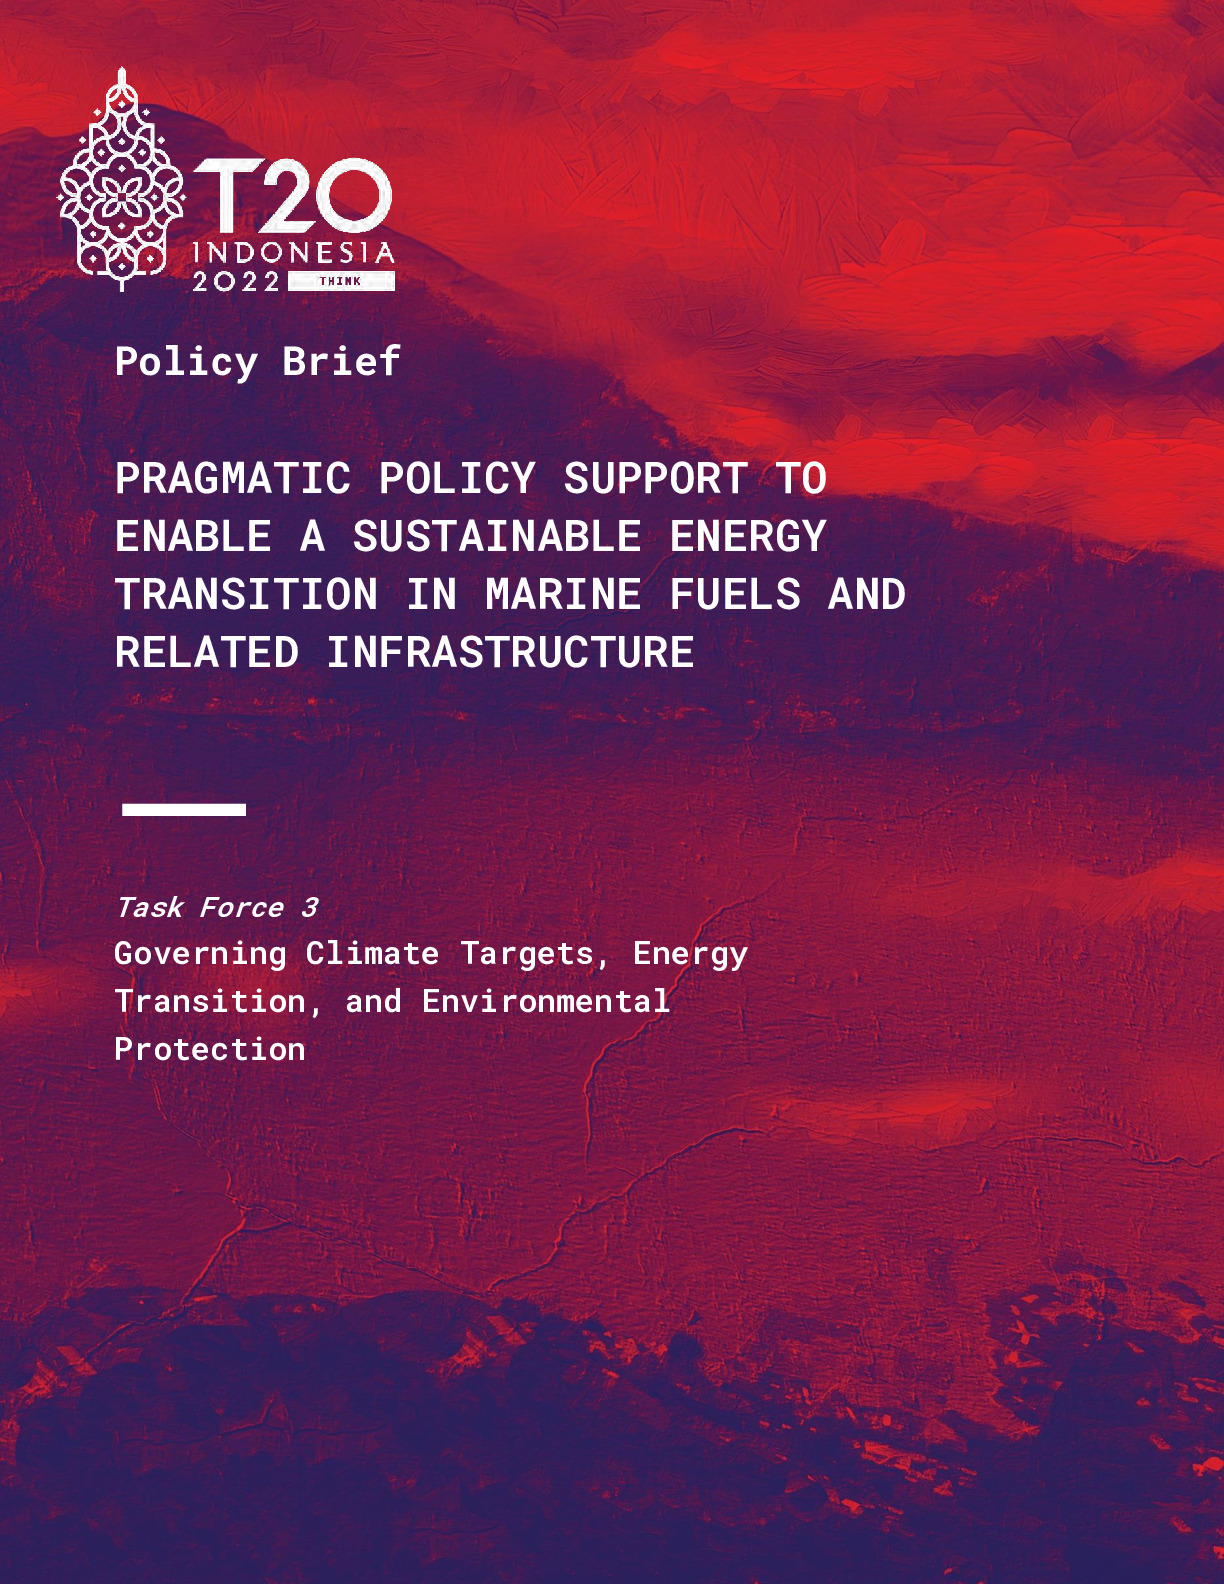 Pragmatic Policy Support to Enable a Sustainable Energy Transition in Marine Fuels and Related Infrastructure